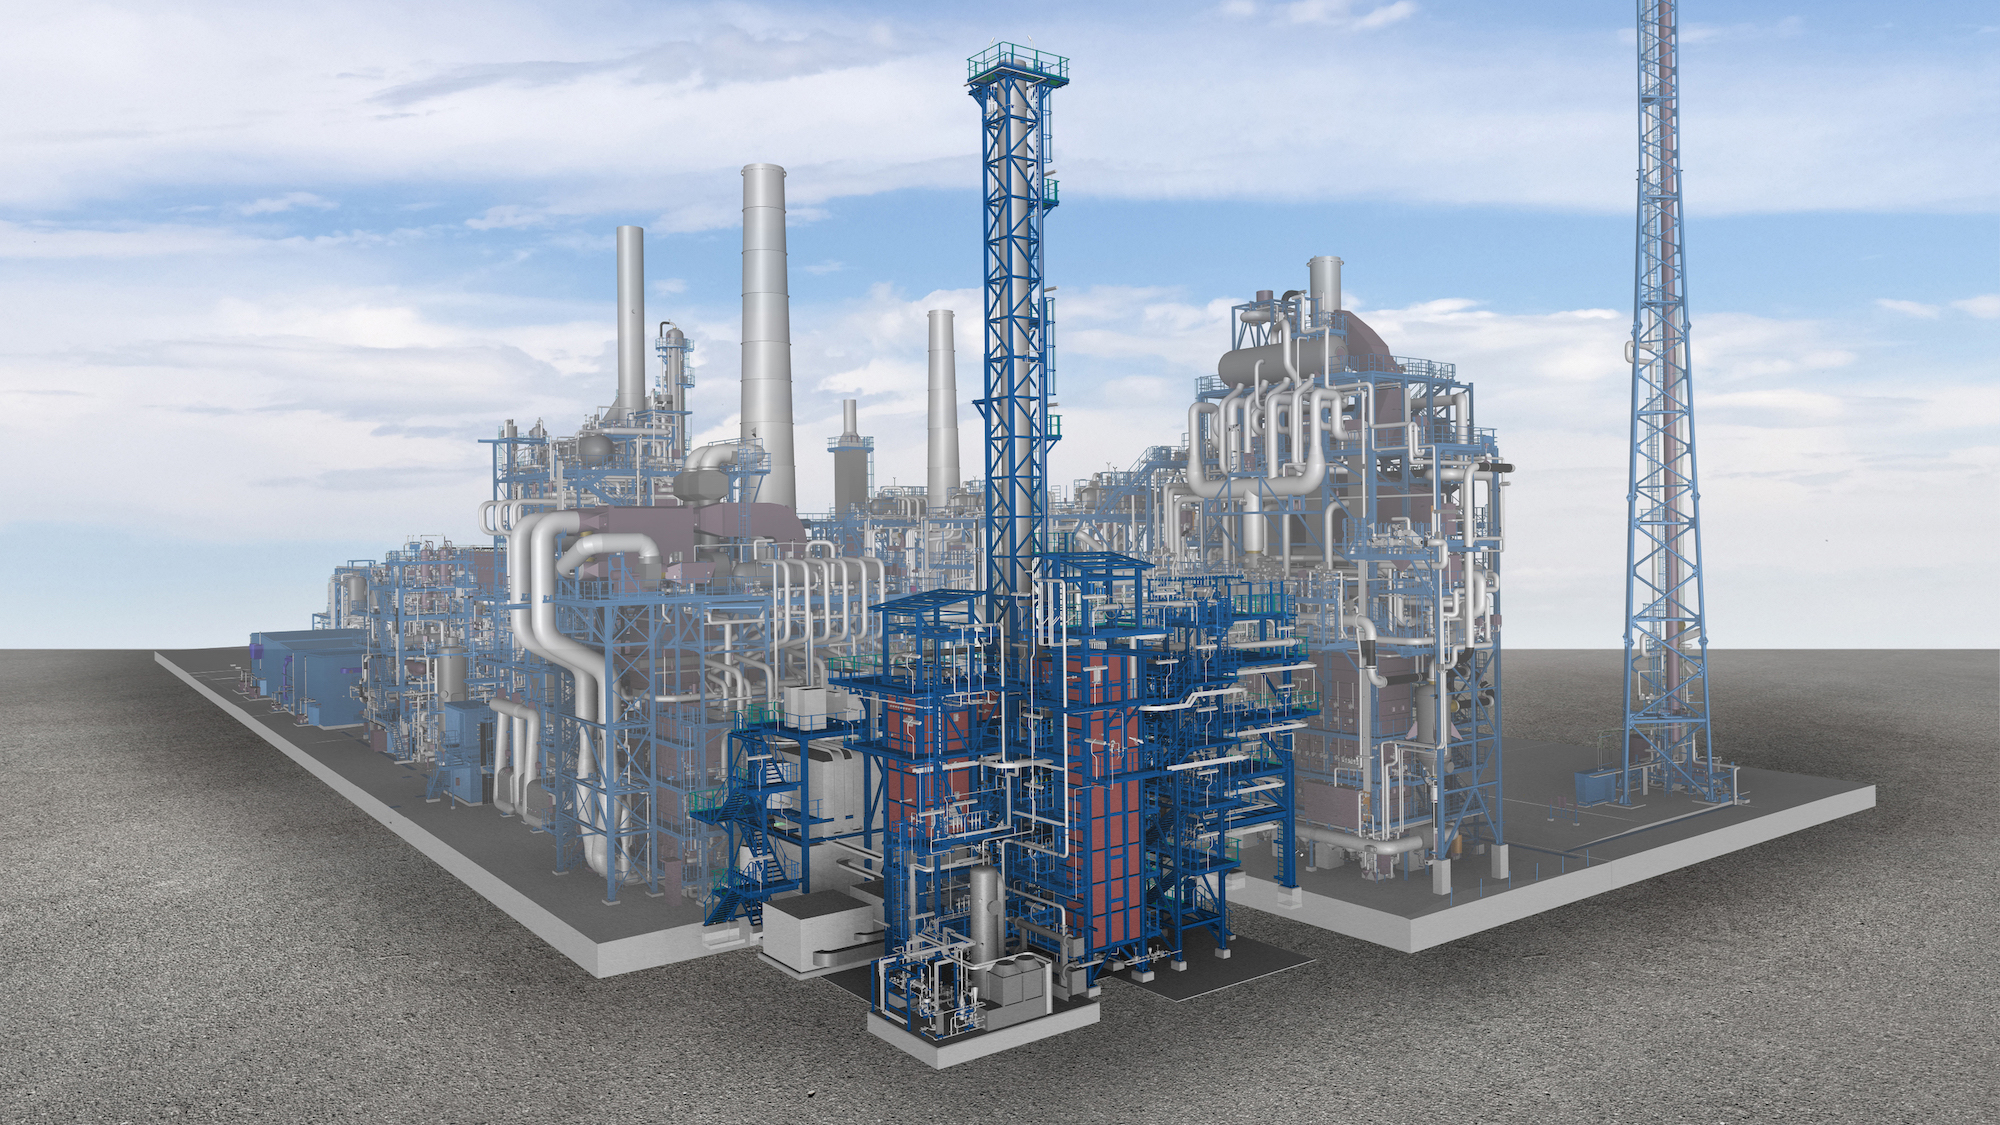 3D graphic of the world’s first demonstration plant for large-scale electrically heated steam cracker furnaces in Ludwigsha